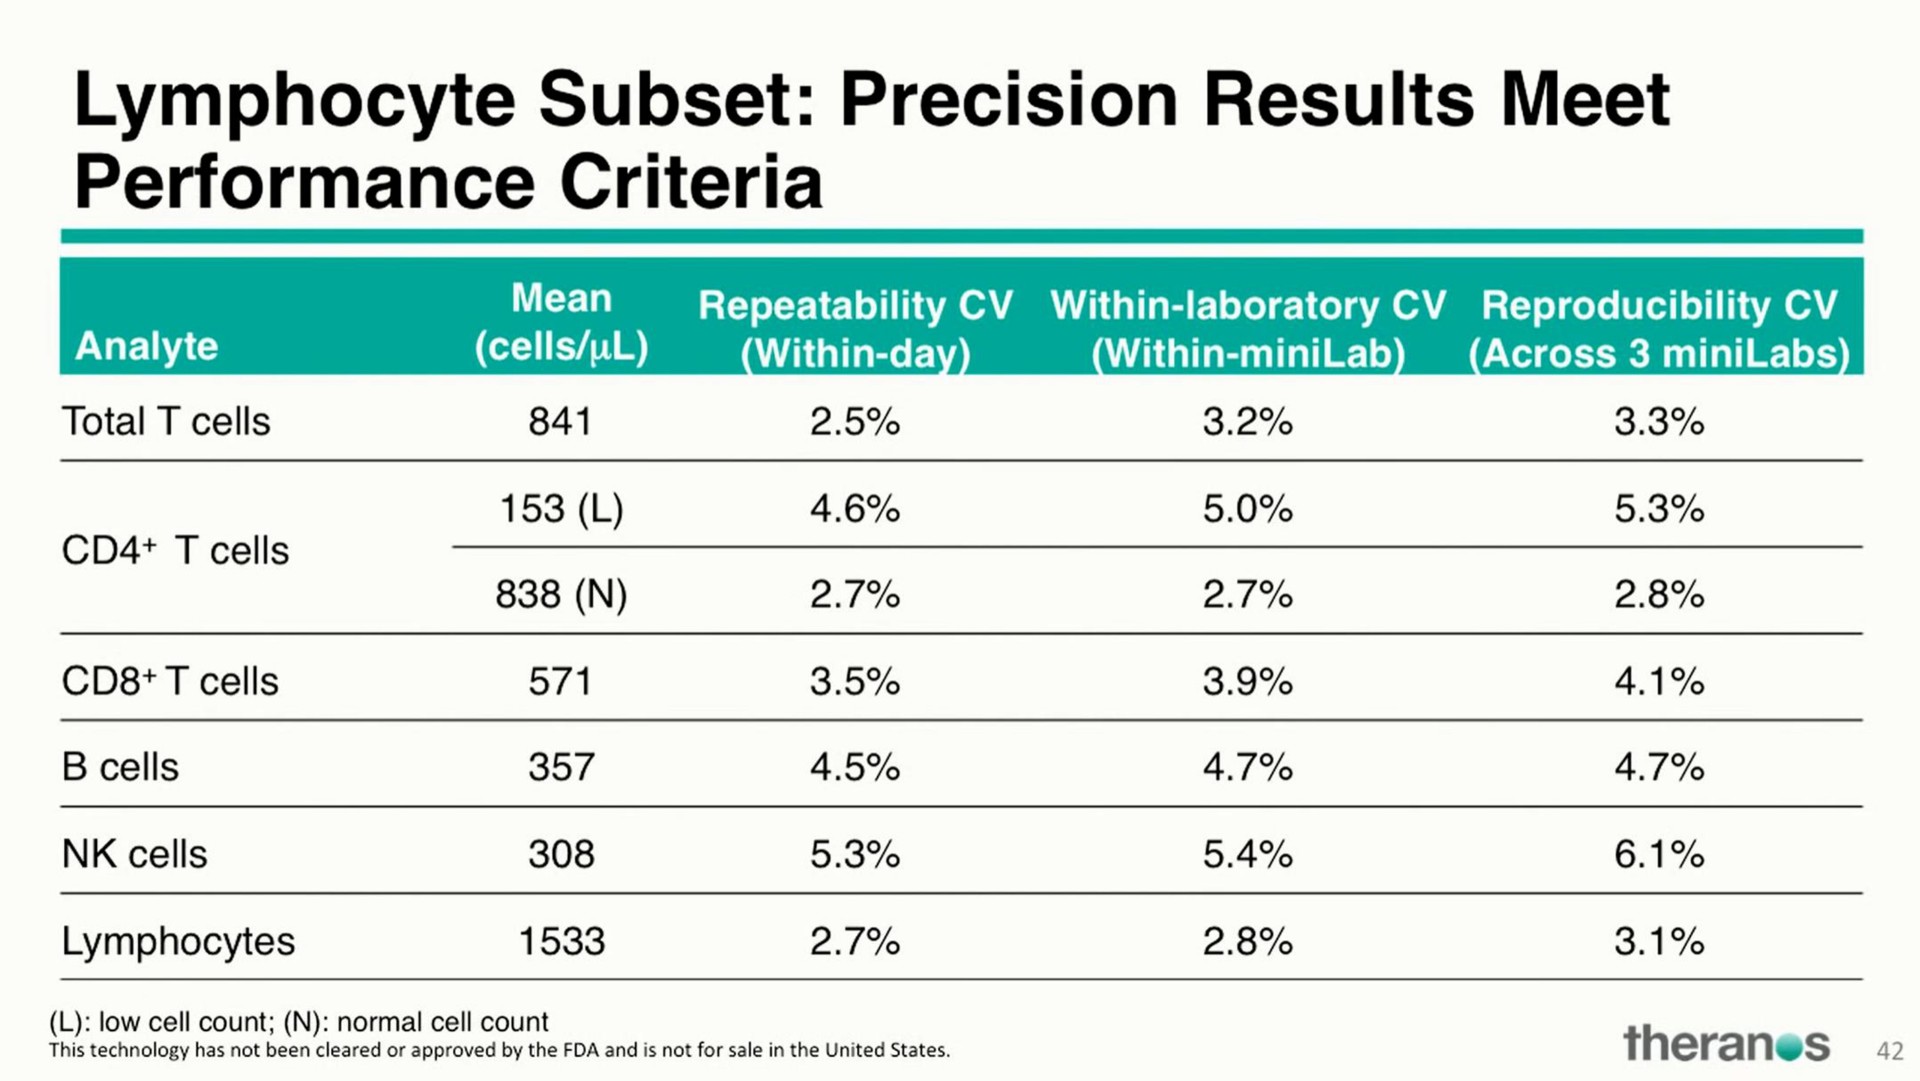 lymphocyte subset precision results meet | Theranos